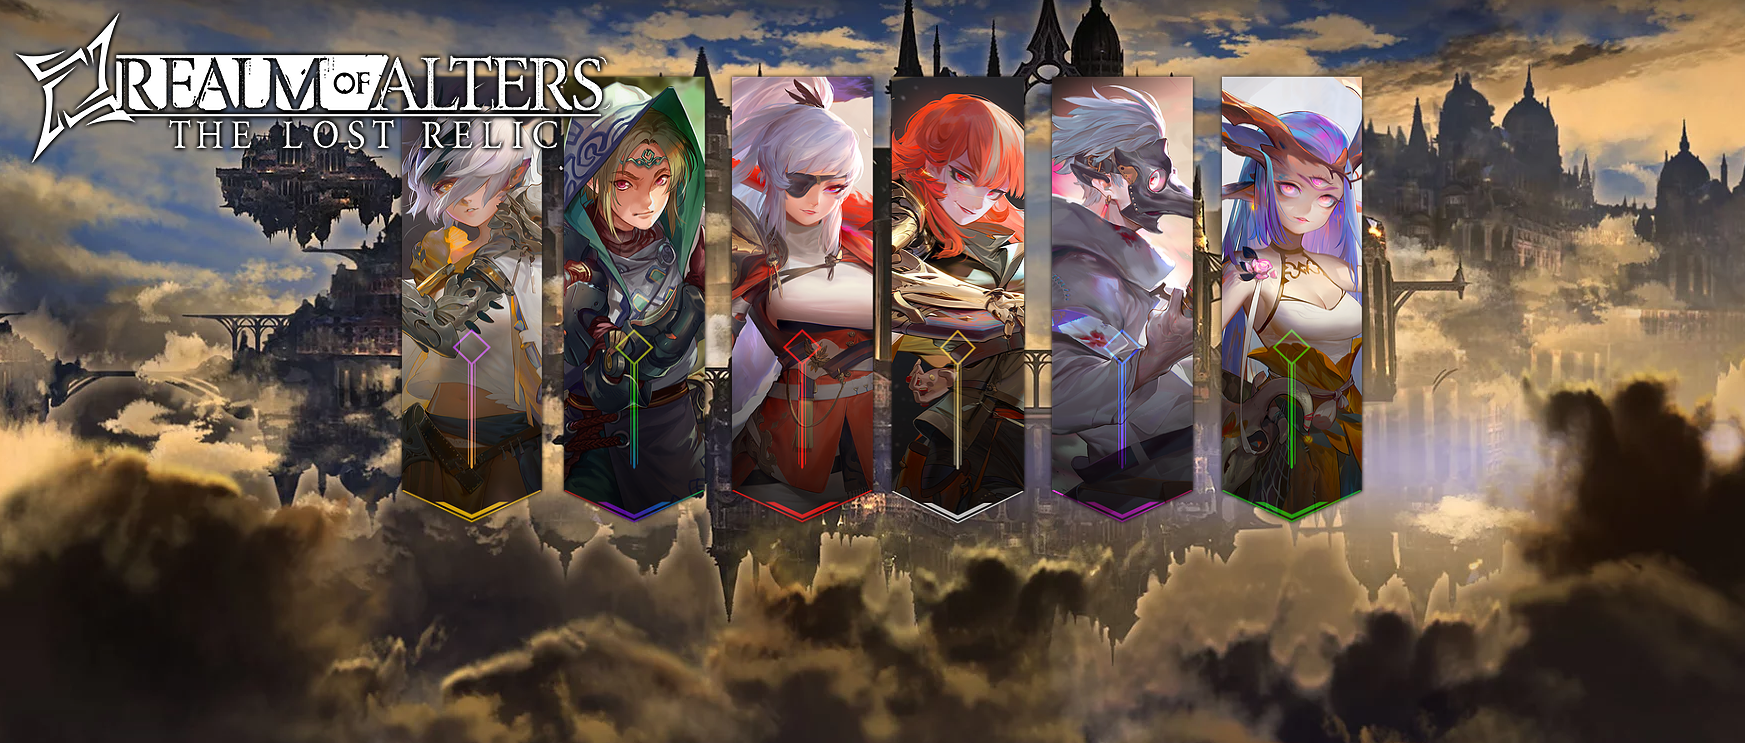 download the alters game